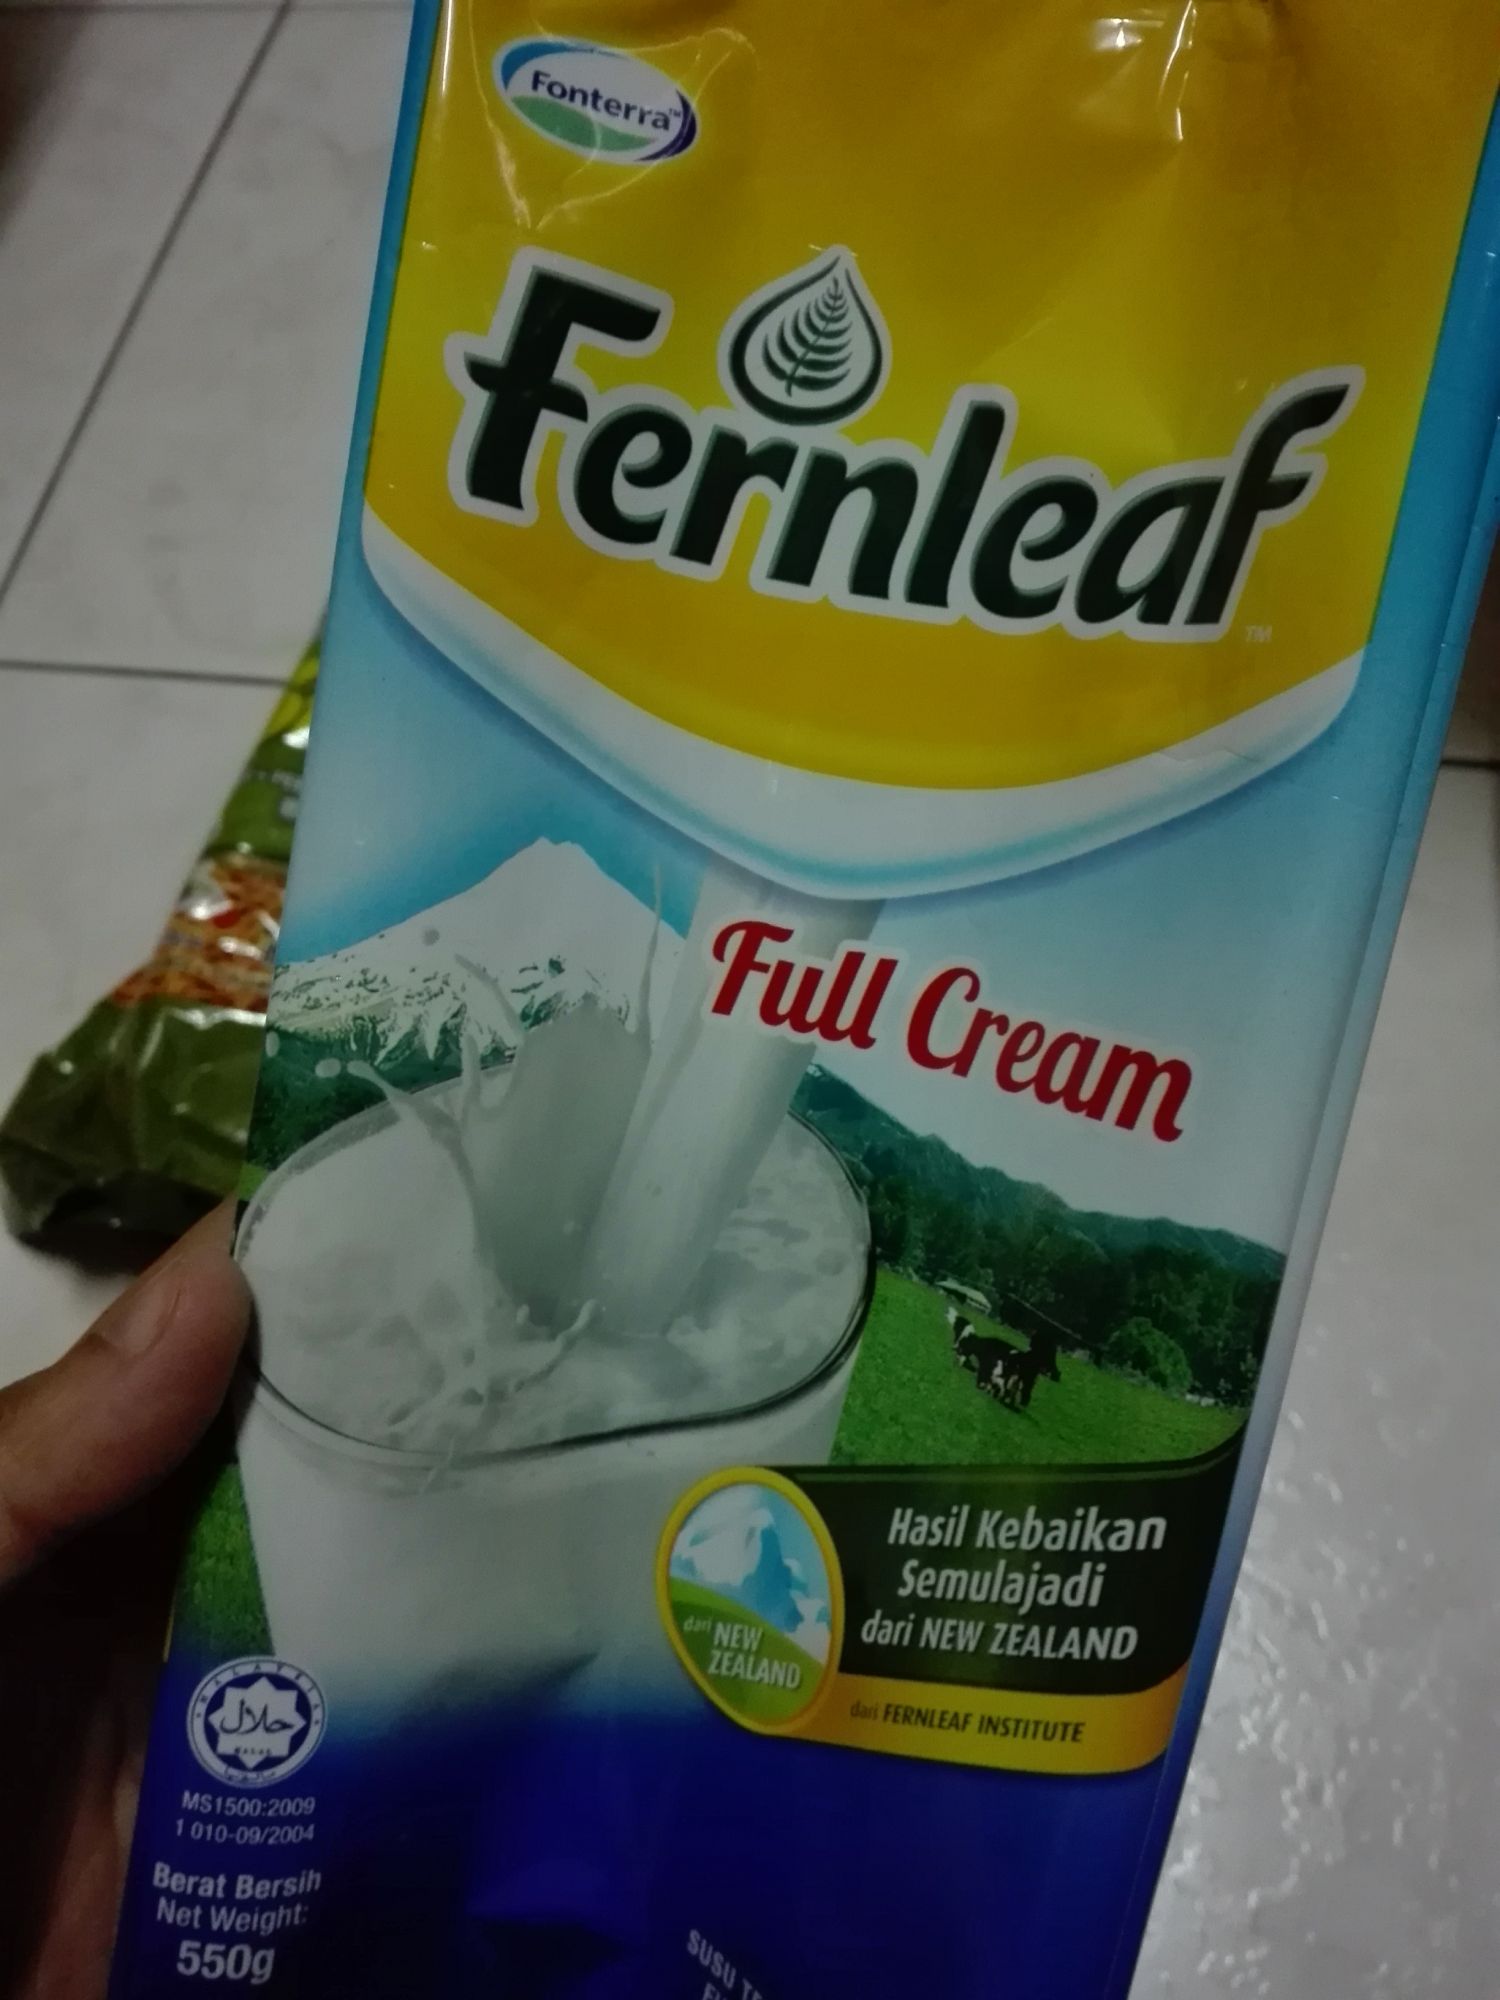 Fernleaf Full Cream Milk : Fernleaf Milk Powder - Family | NTUC FairPrice : Find out more about fernleaf malaysia and what they offer below.